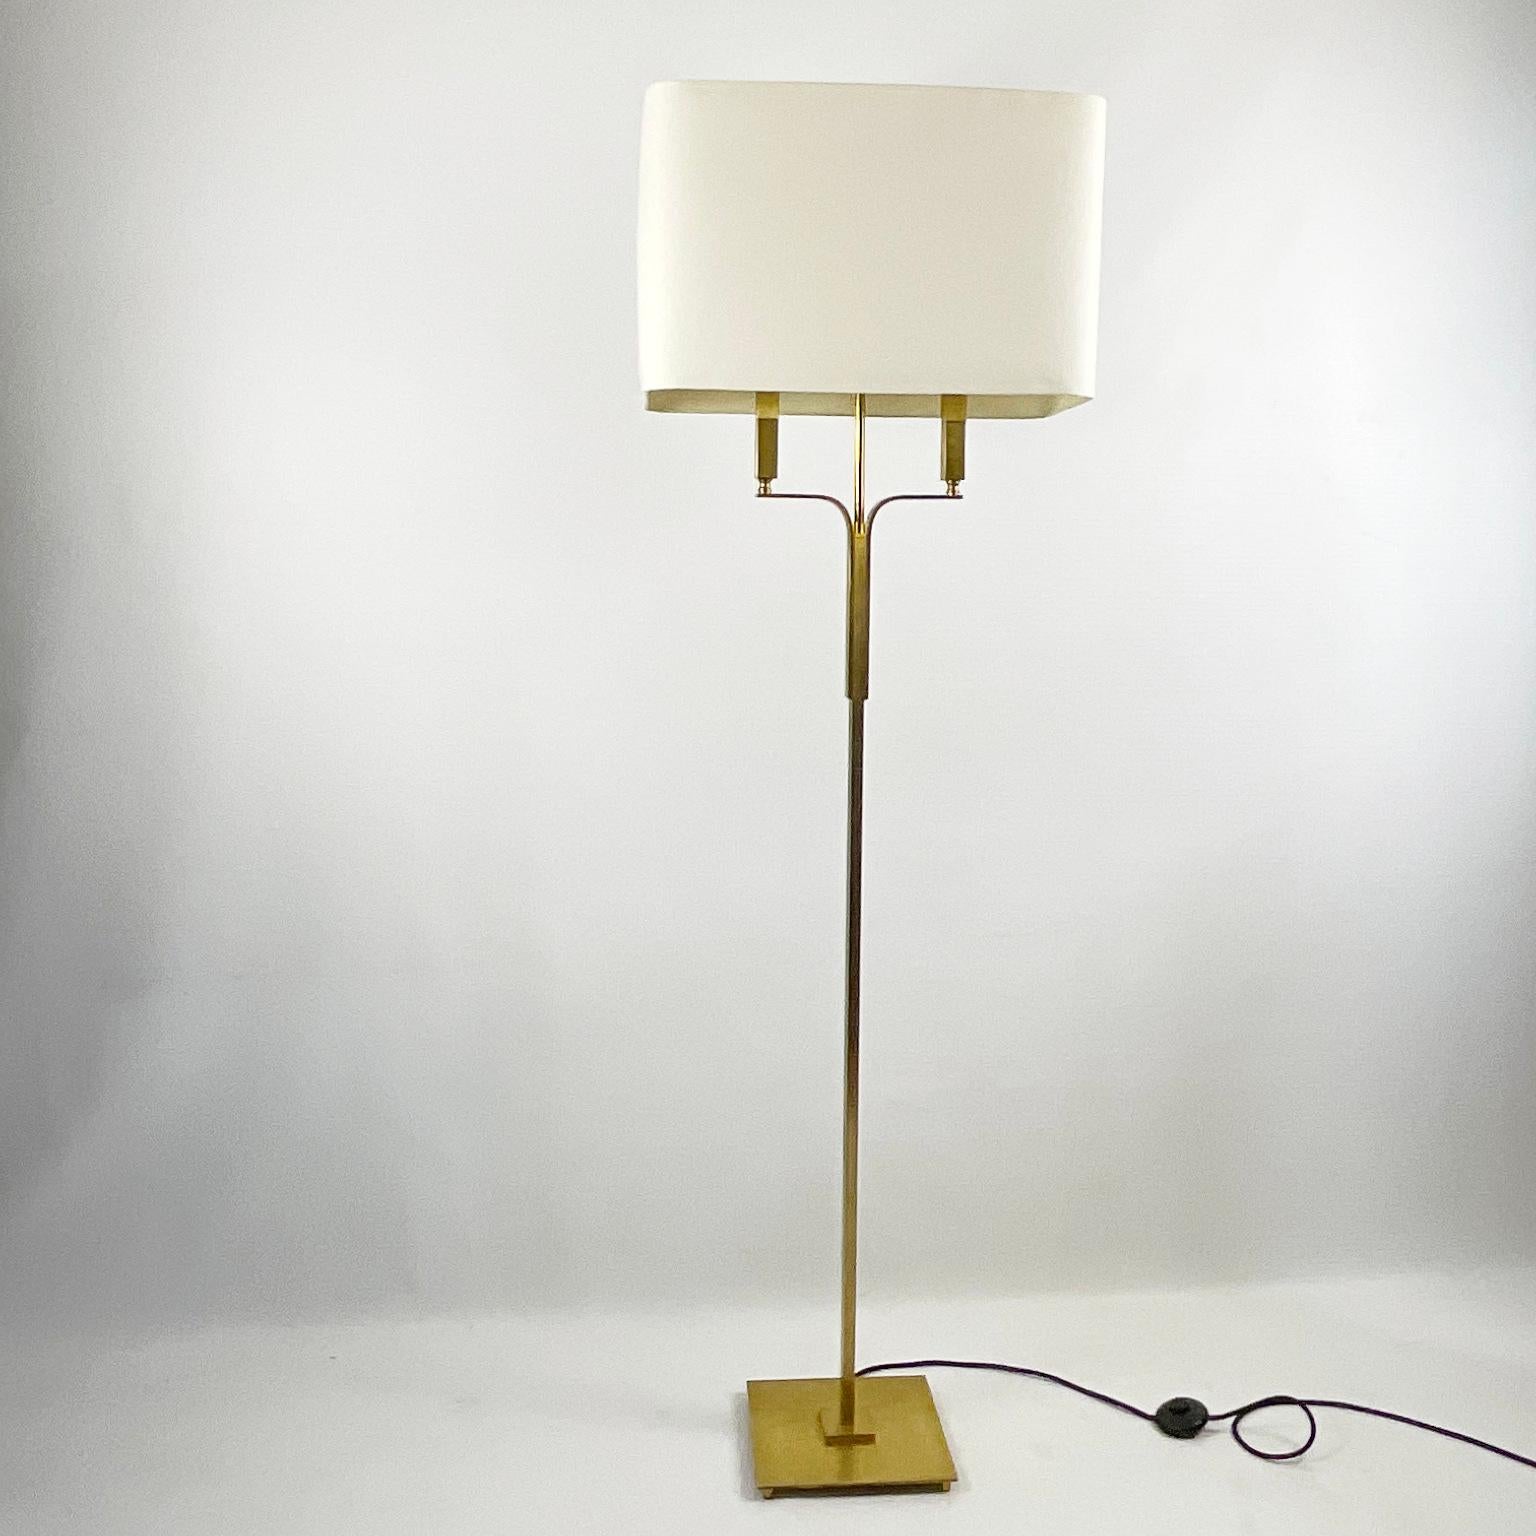 Floor lamp in brushed brass from the 70s in a manner of Maison Charles or Perzel, with two bulbs covered with a rectangular lampshade. Completely rewired with an in-line footswitch.